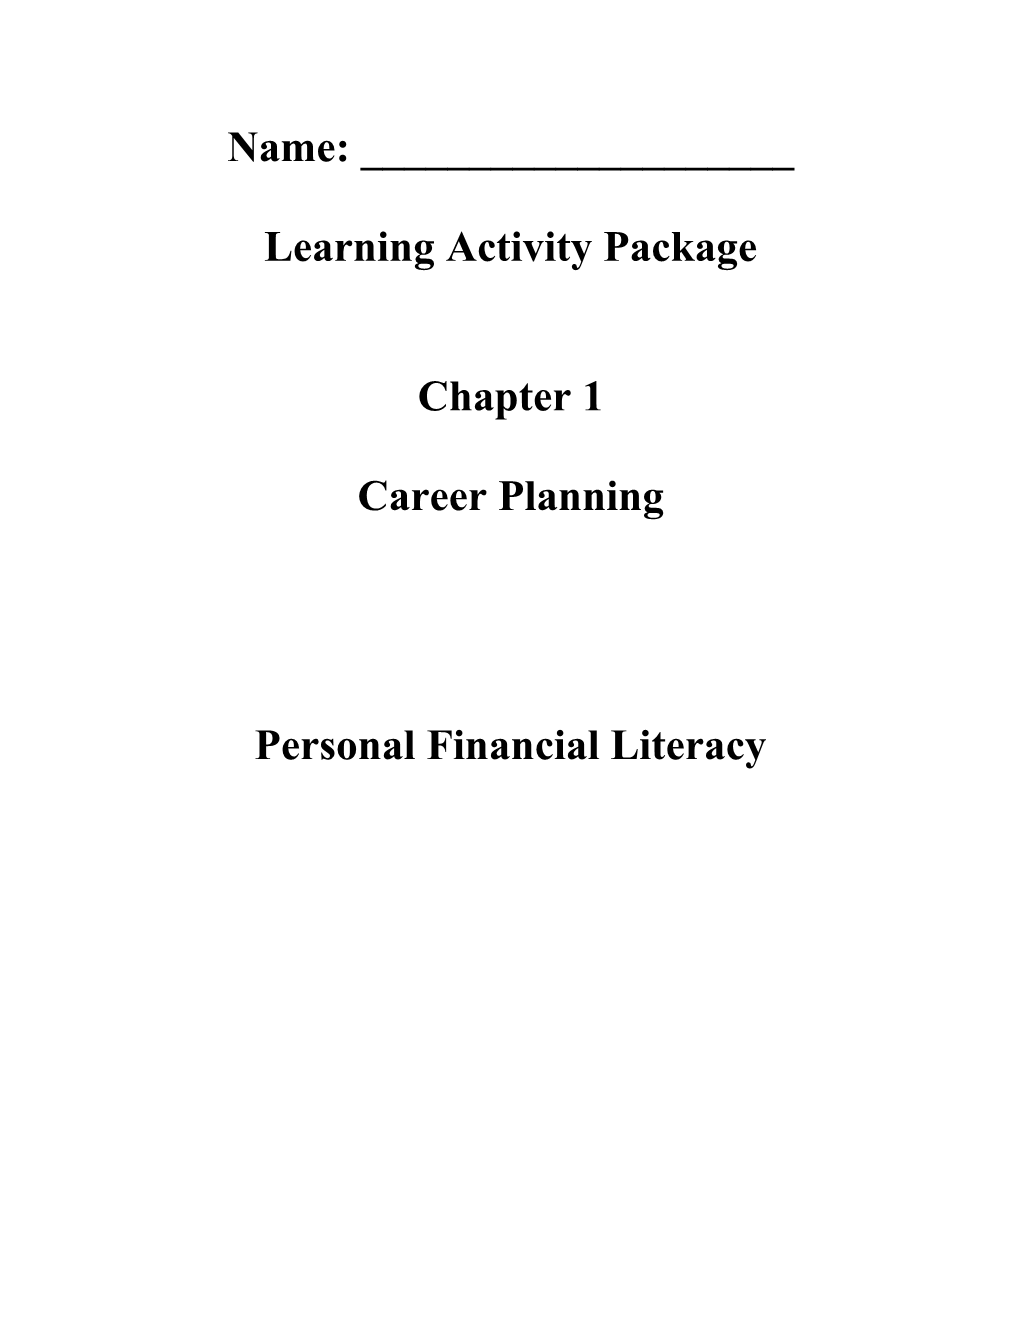 Learning Activity Package